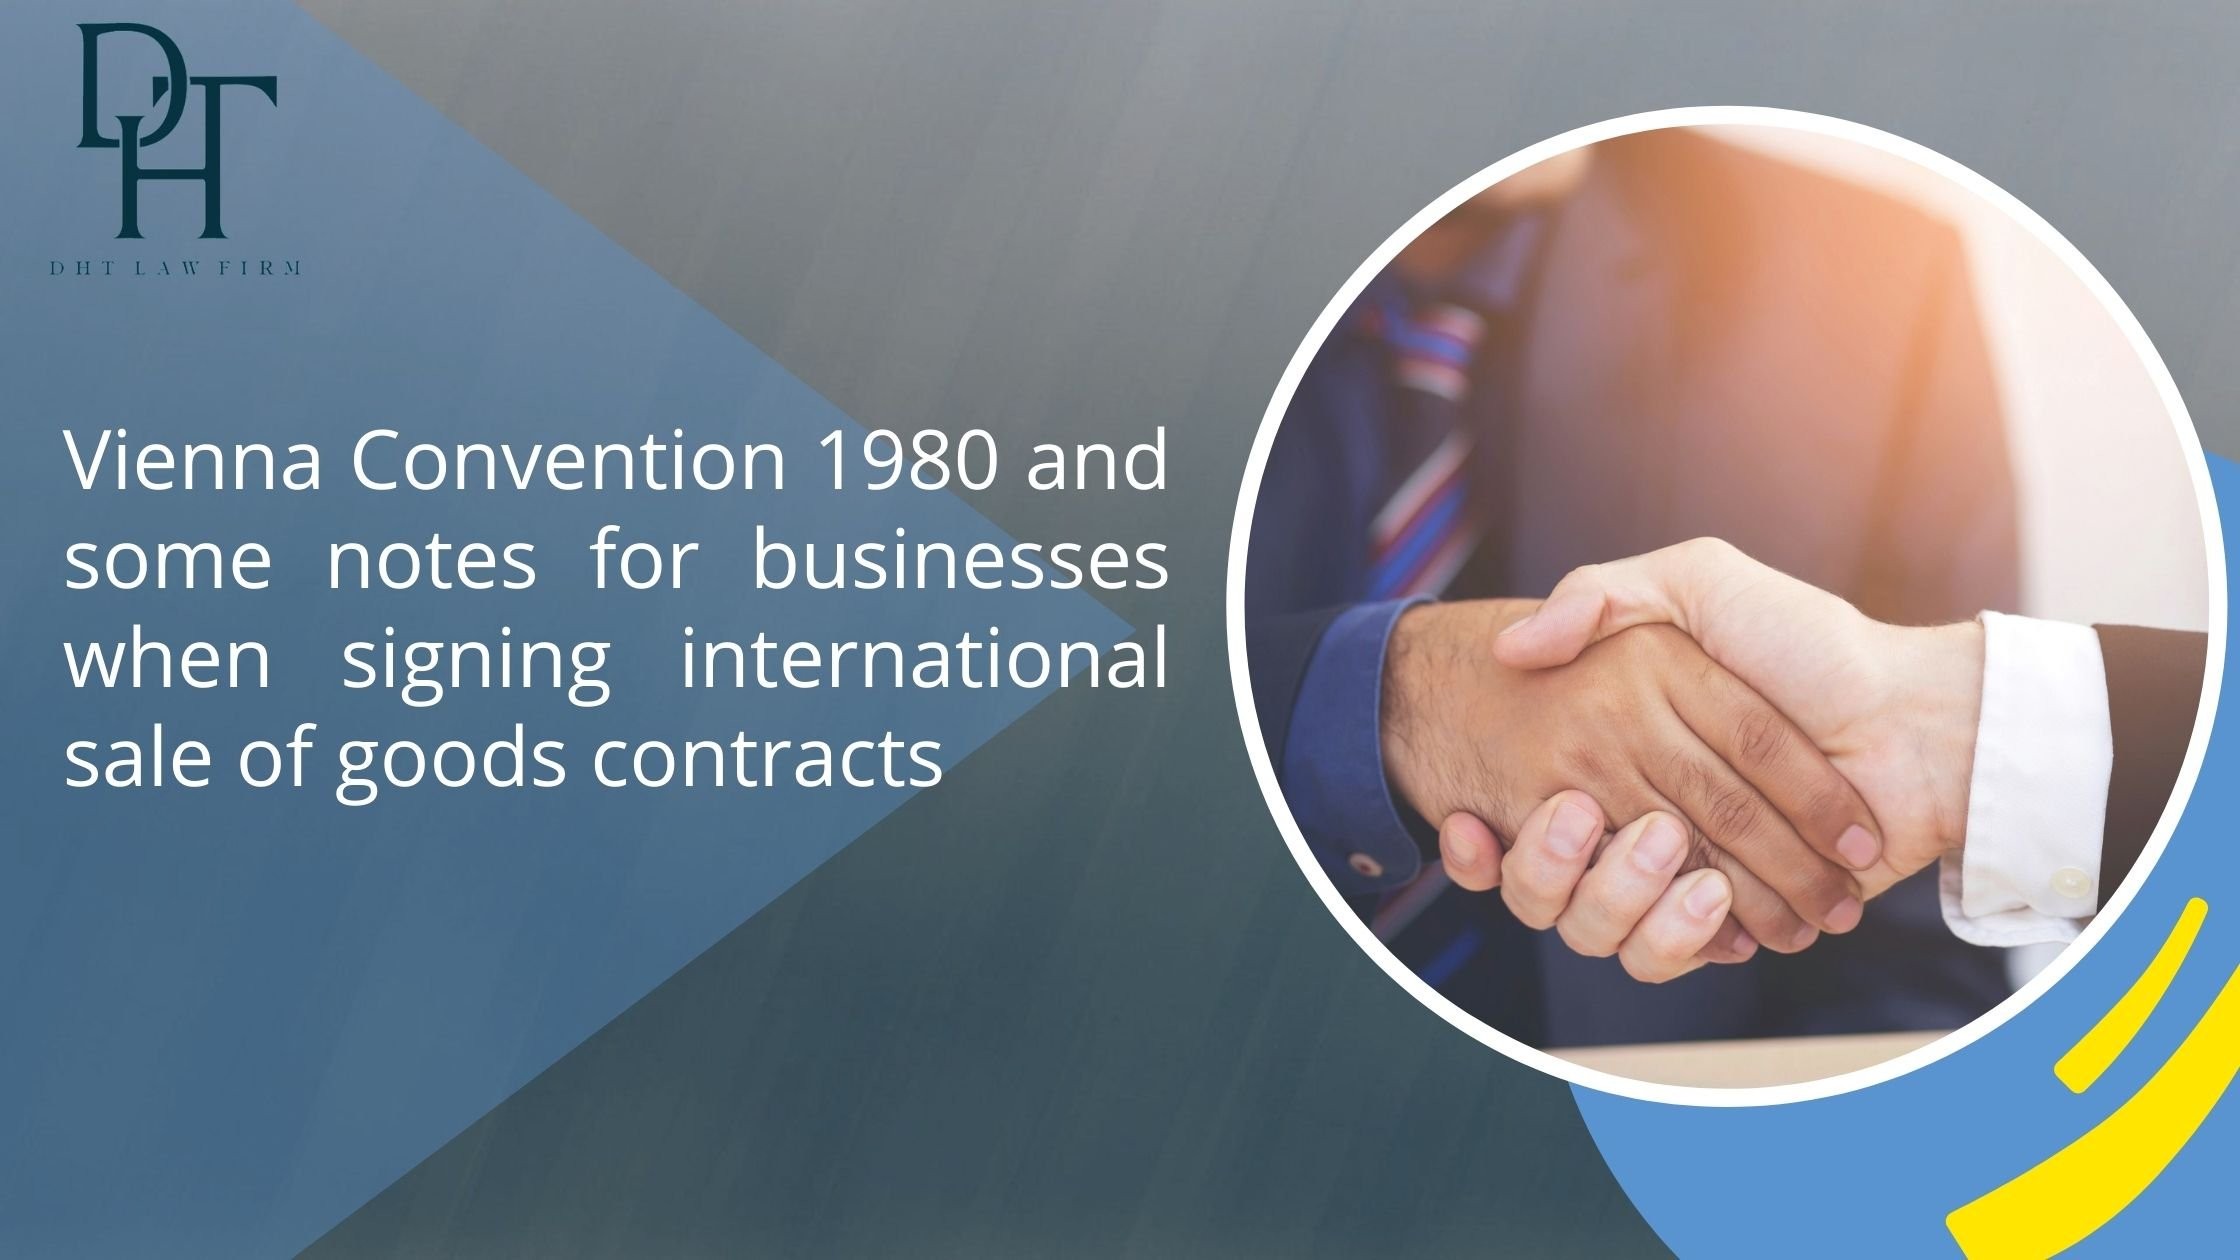 VIENNA CONVENTION 1980 AND SOME NOTES FOR BUSINESSES WHEN SIGNING INTERNATIONAL SALES OF GOODS CONTRACTS